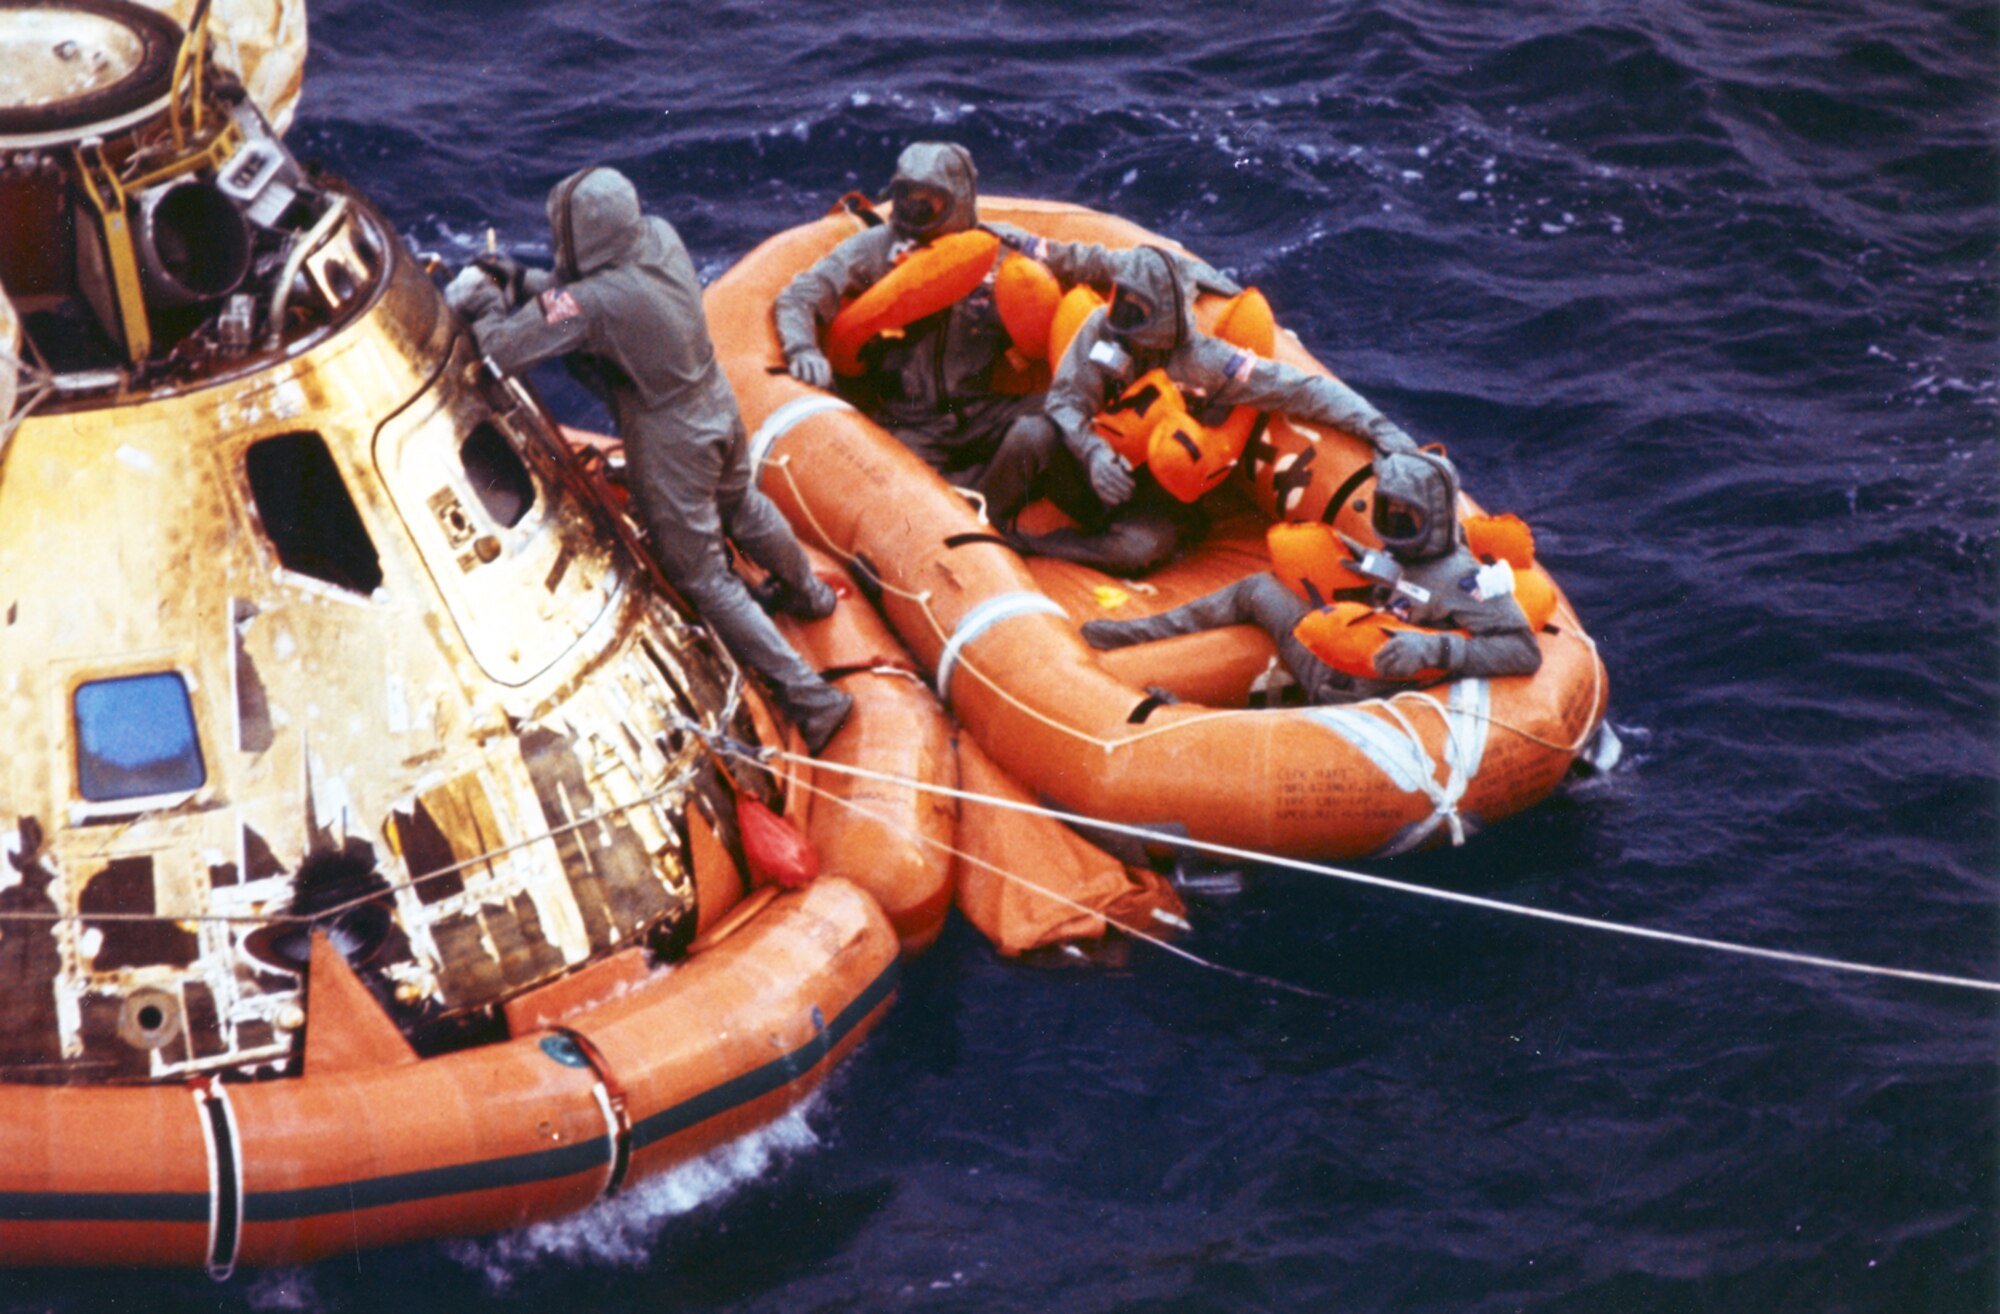 Pararescueman Lt. Clancy Hatleberg closes the Apollo 11 spacecraft hatch as astronauts Neil Armstrong, Michael Collins and Buzz Aldrin, Jr await helicopter pickup from their life raft. They splashed down at 12:50 pm EDT July 24, 1969, 900 miles southwest of Hawaii after asuccessful lunar landing mission. (photo/NASA)